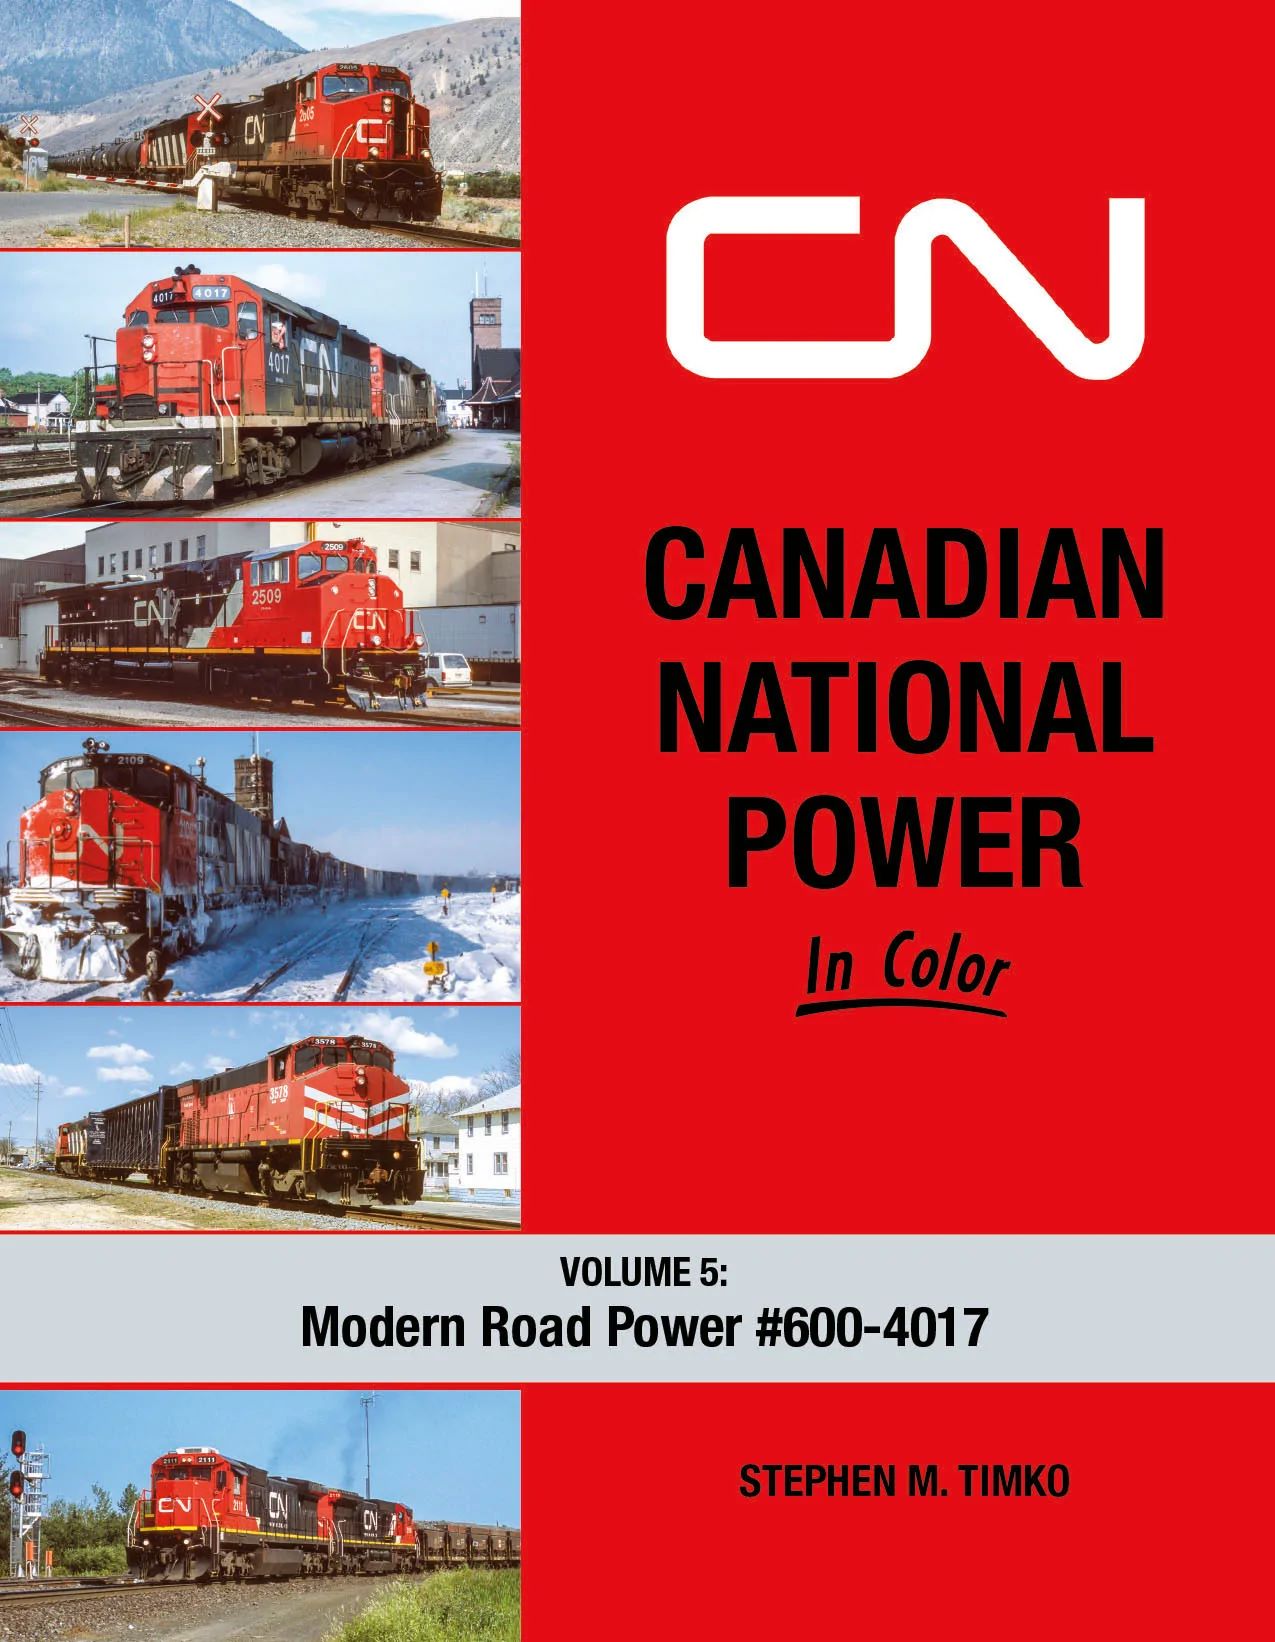 Canadian National Power, Vol. 5